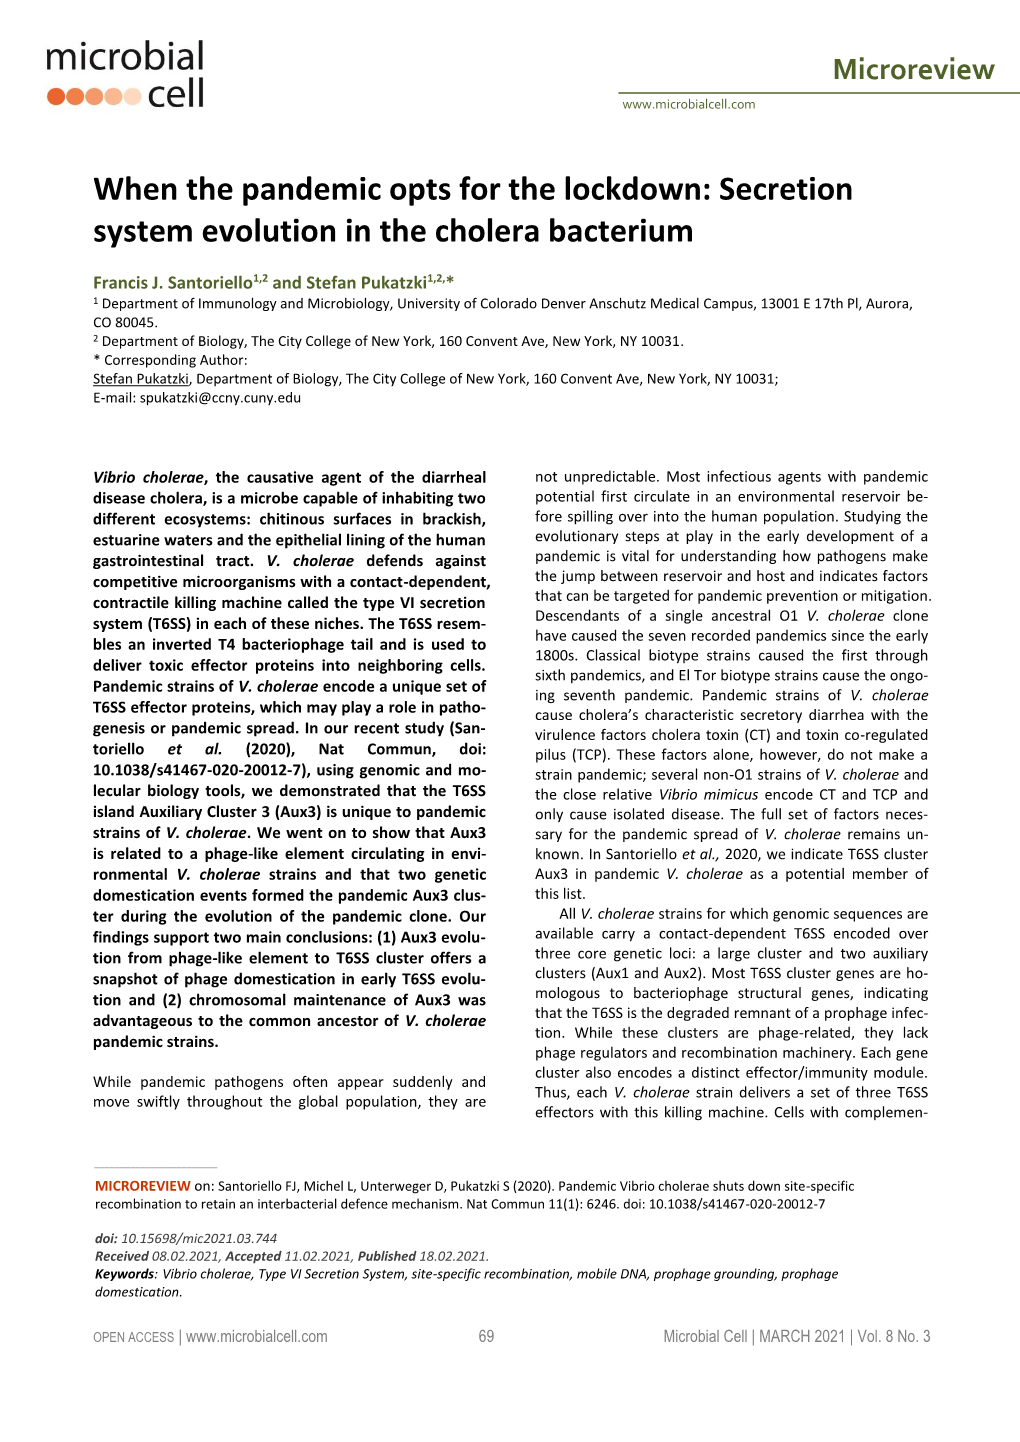 When the Pandemic Opts for the Lockdown: Secretion System Evolution in the Cholera Bacterium